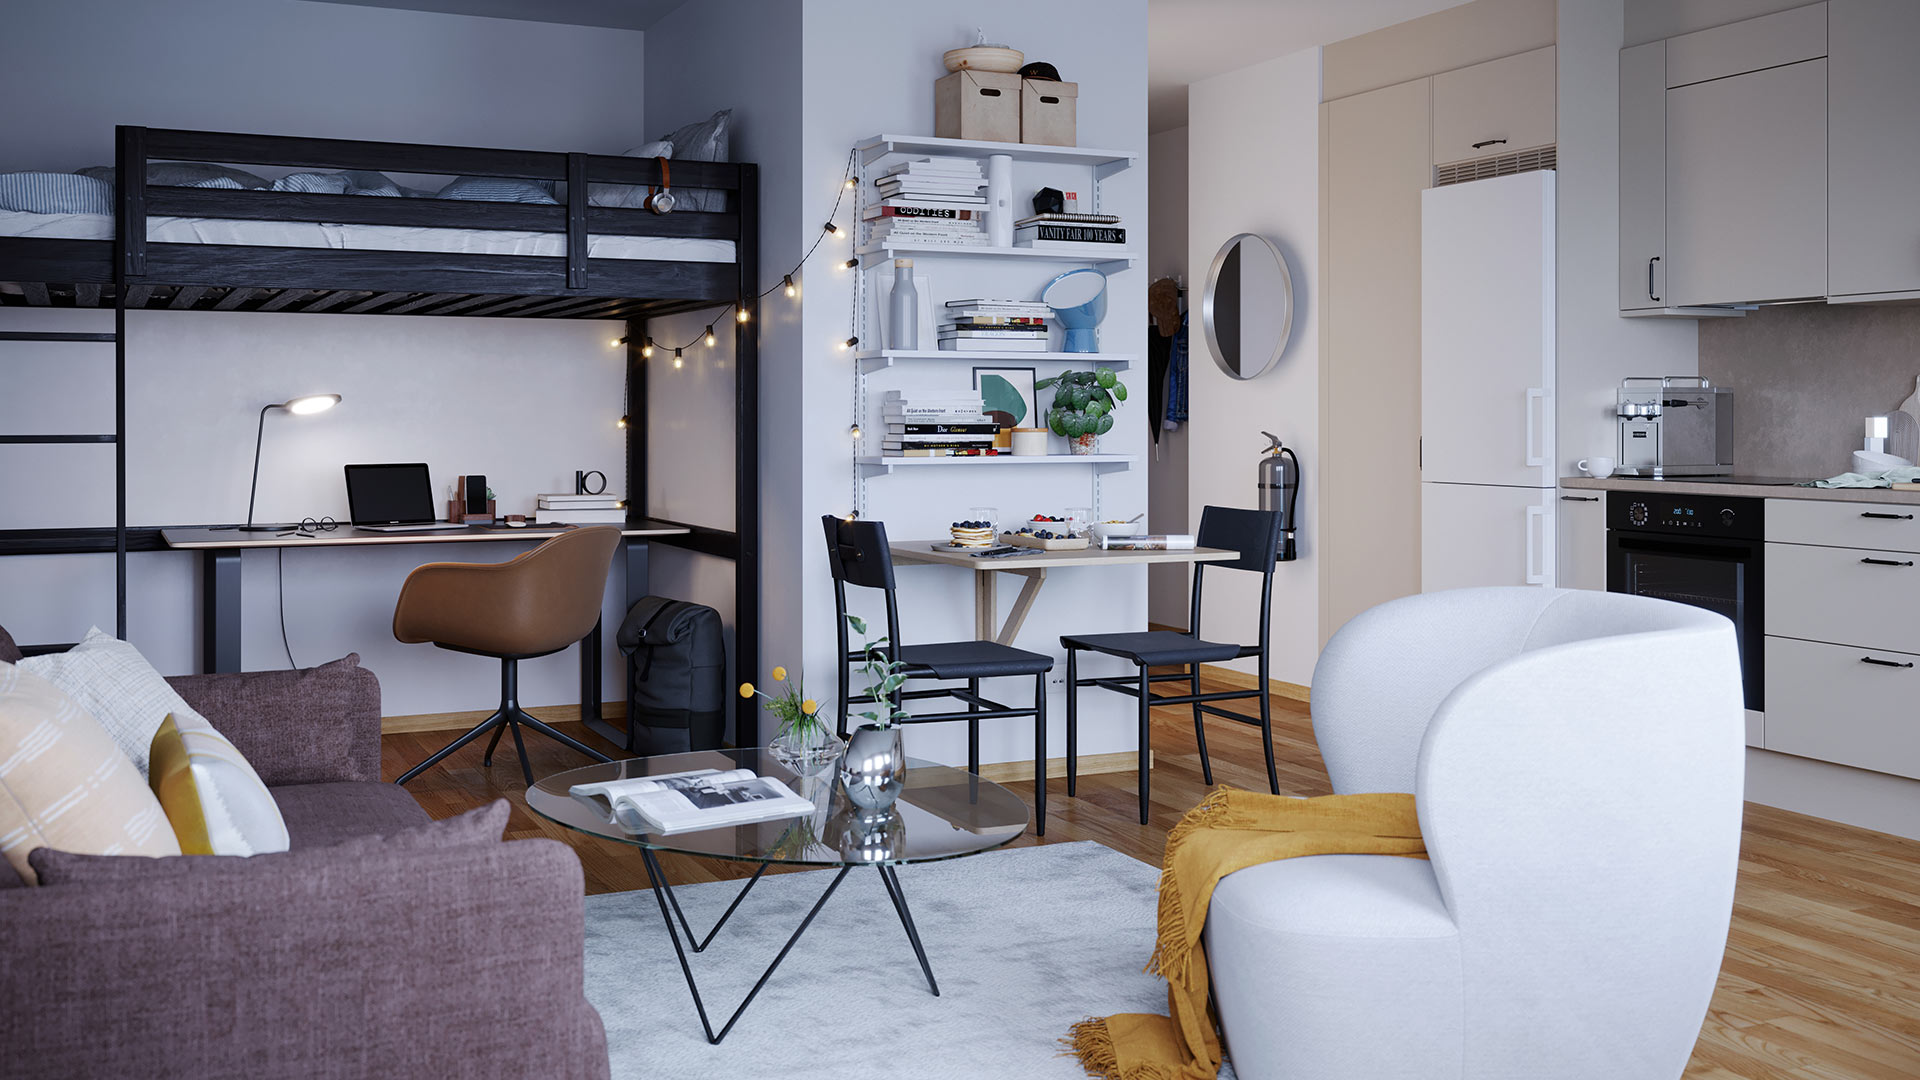 You'll always be able to make the dining table a focal point for parties, design your own home office or just arrange a quiet place to relax in even in the smaller studio apartments.